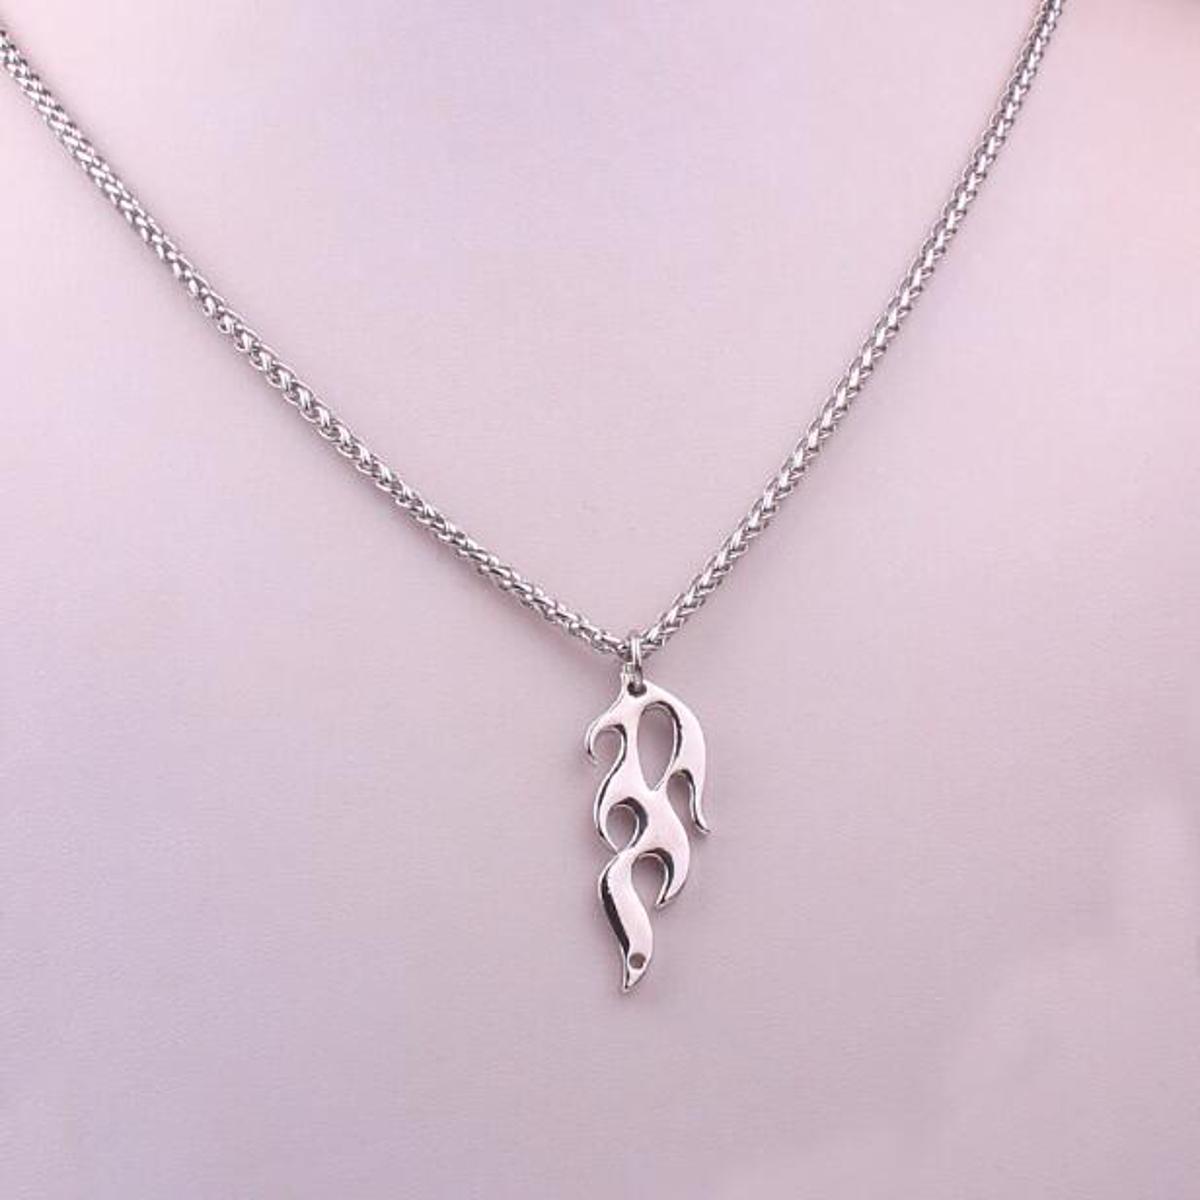 Fashion Long Ear Bunny Pendant Necklaces Charm Necklace Party Goth Jewelry